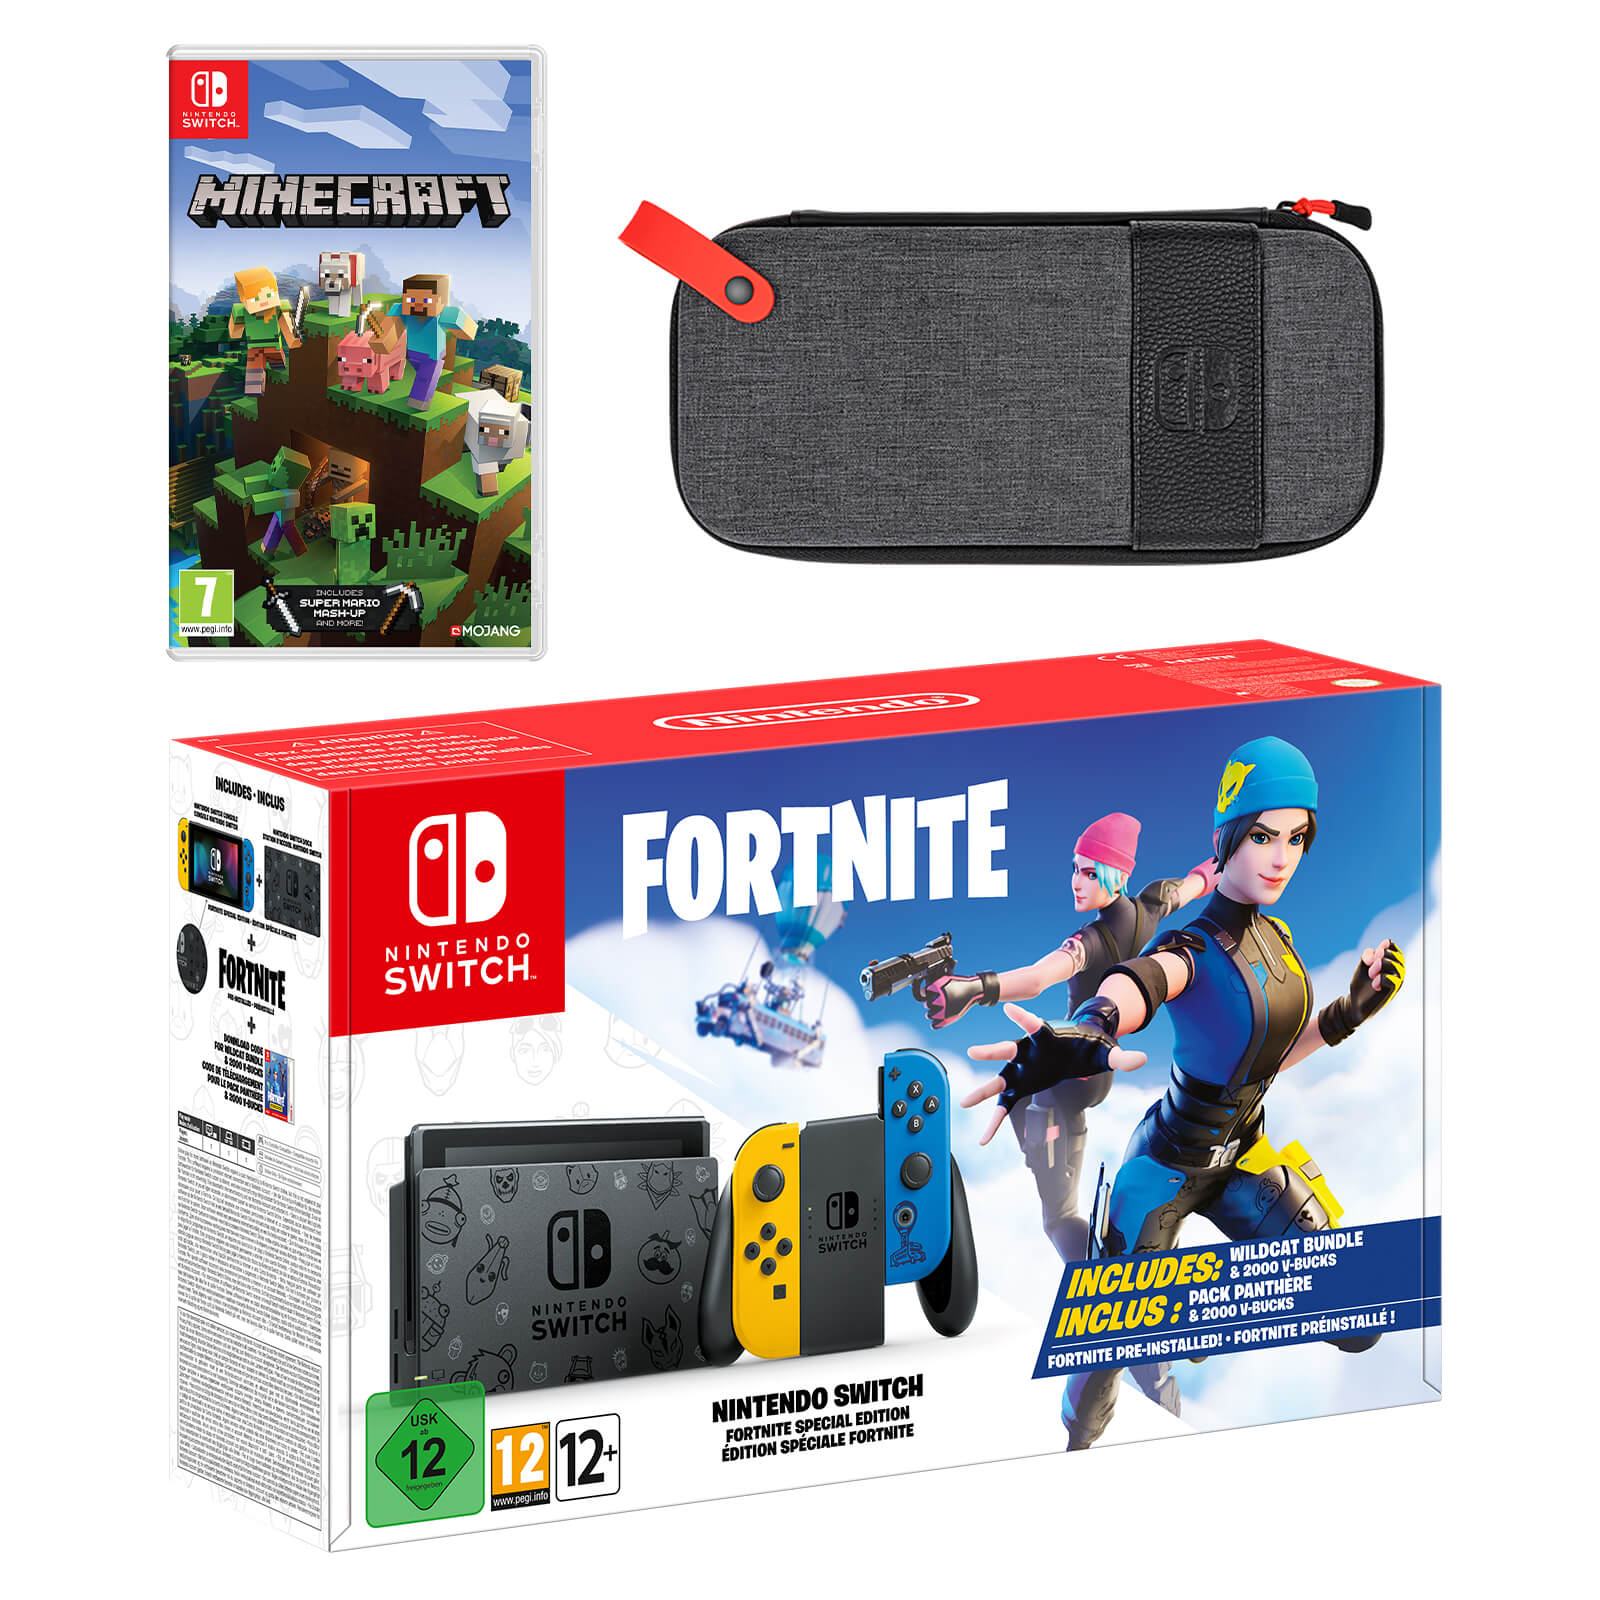 Nintendo Switch Fortnite Special Edition Minecraft Pack Nintendo Official Uk Store